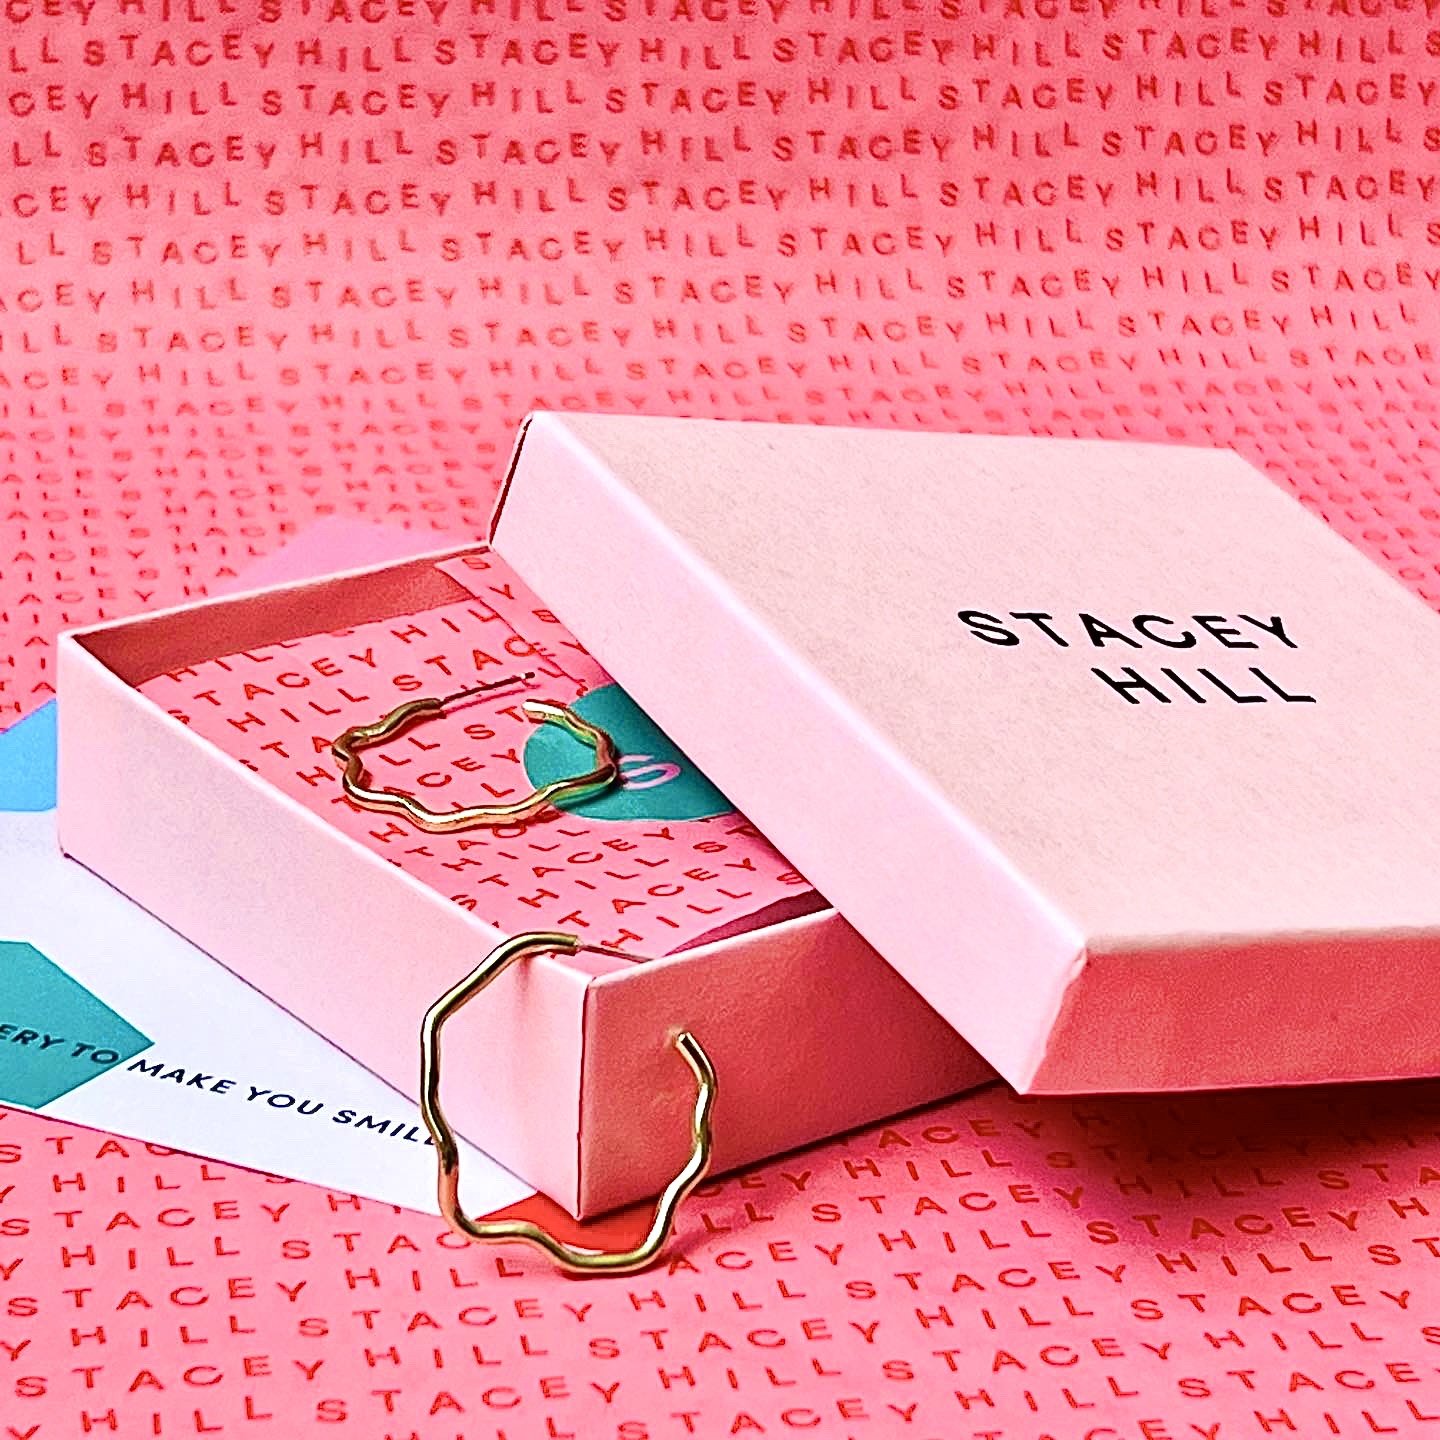  A pink Stacey Hill jewellery box with a pair of gold wiggly earrings inside. 